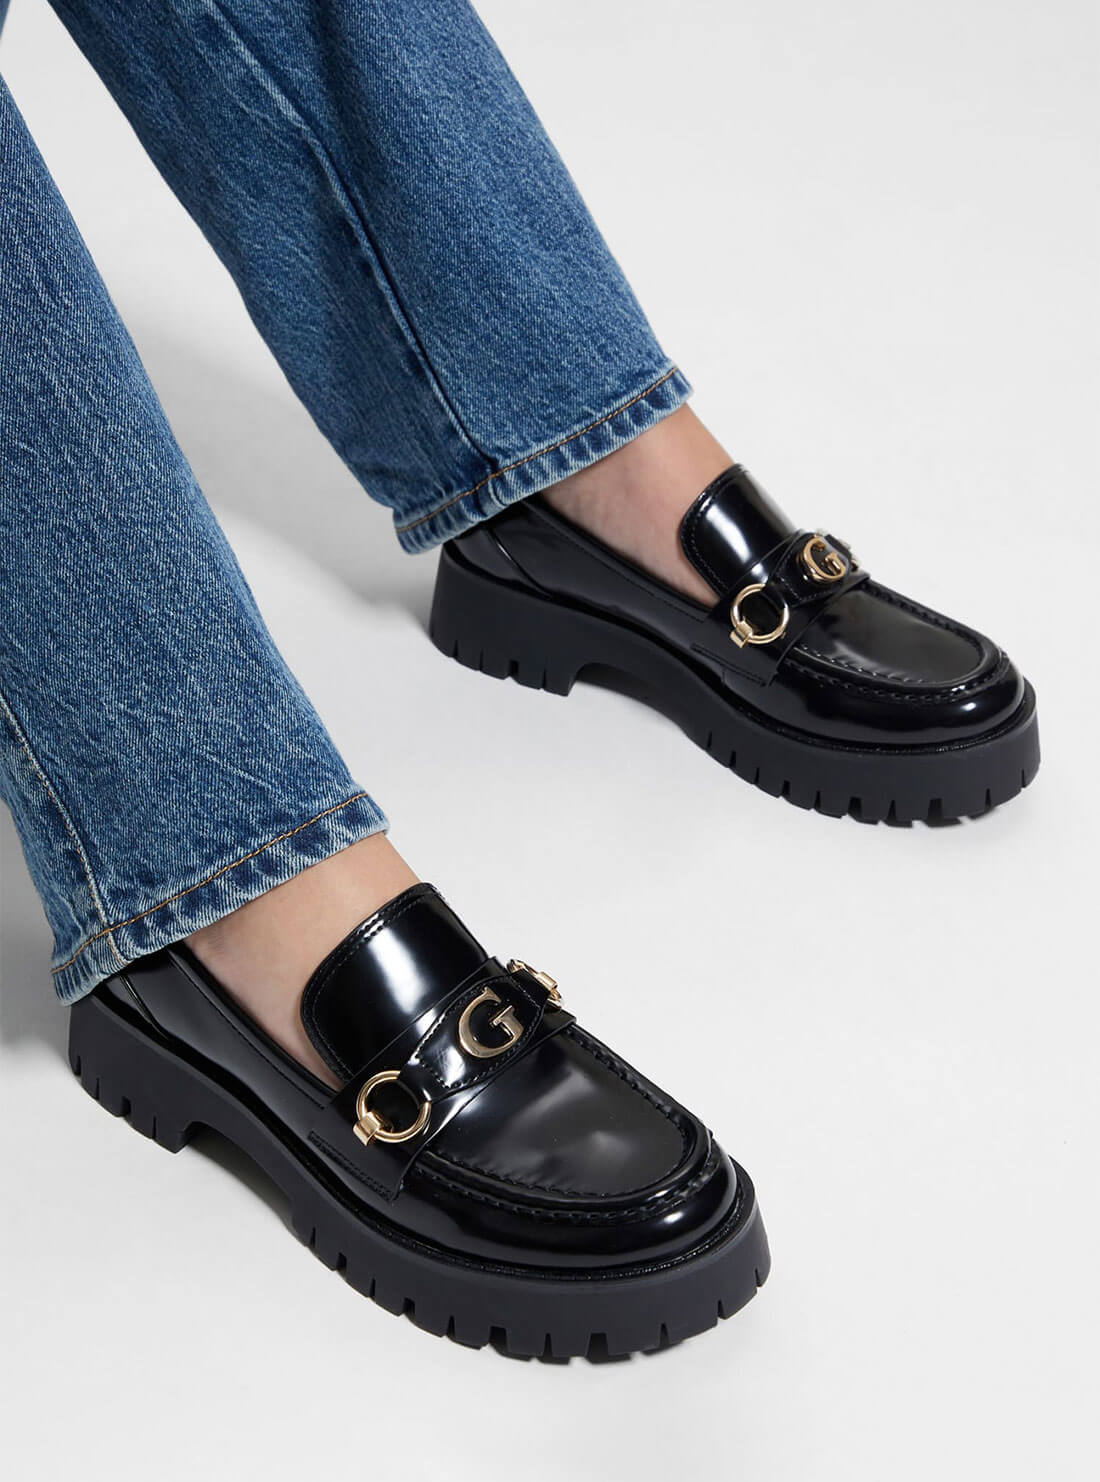 Black Almost Loafers | GUESS Women's Shoes | lifestyle view